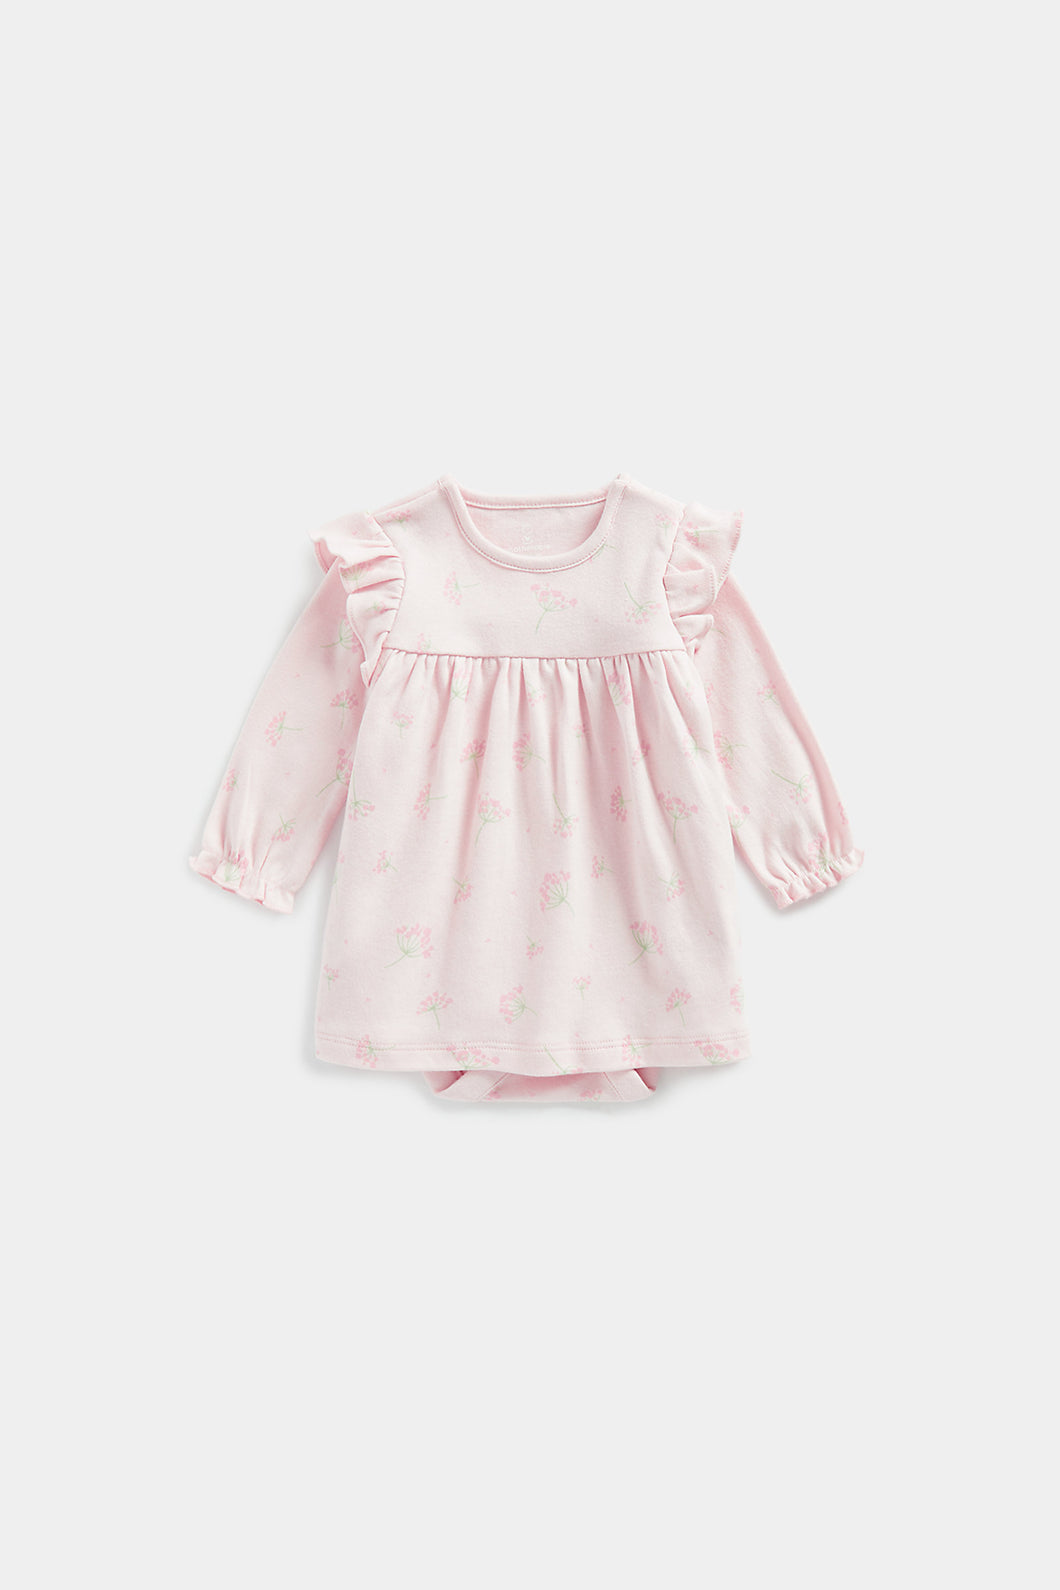 Mothercare My First Pink Romper Dress